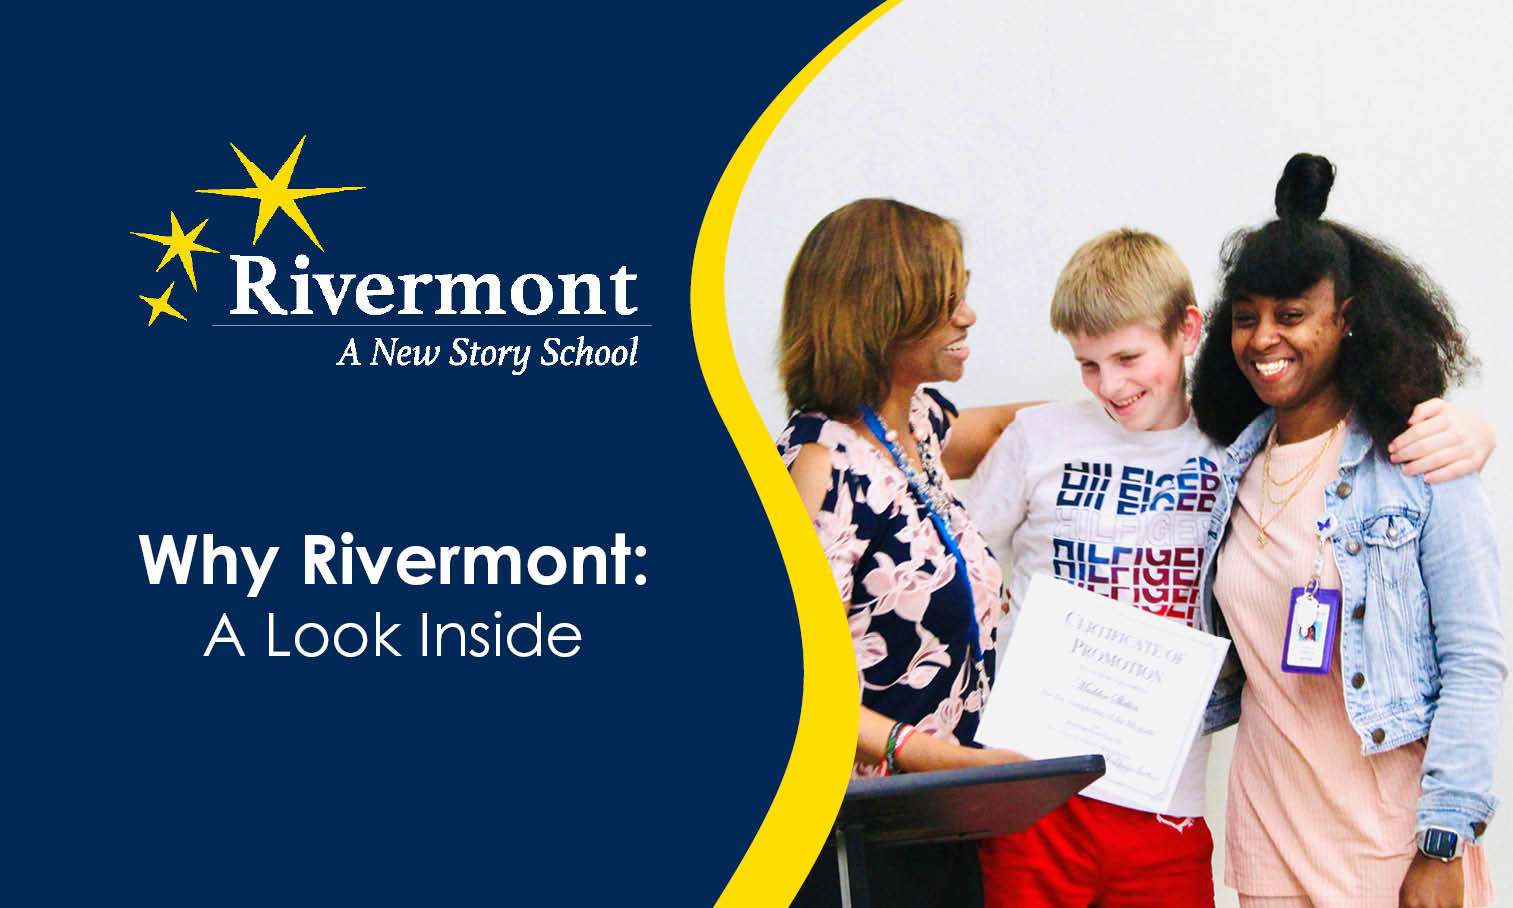 Why Rivermont social and inner image